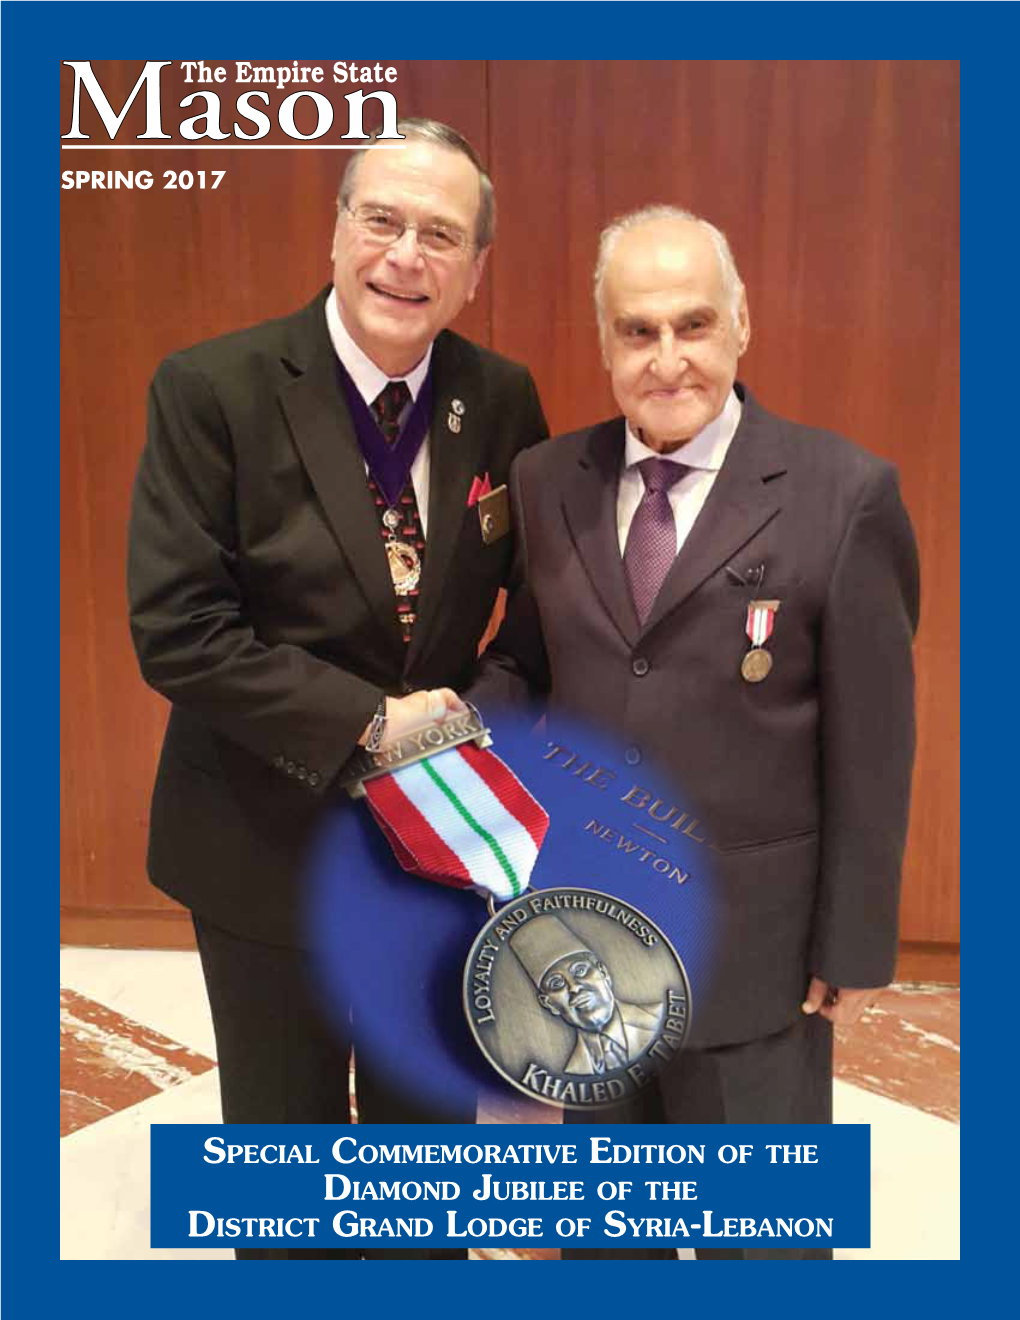 Special Commemorative Edition of the Diamond Jubilee of the District Grand Lodge of Syria-Lebanon from the Grand East MW Jeffrey M